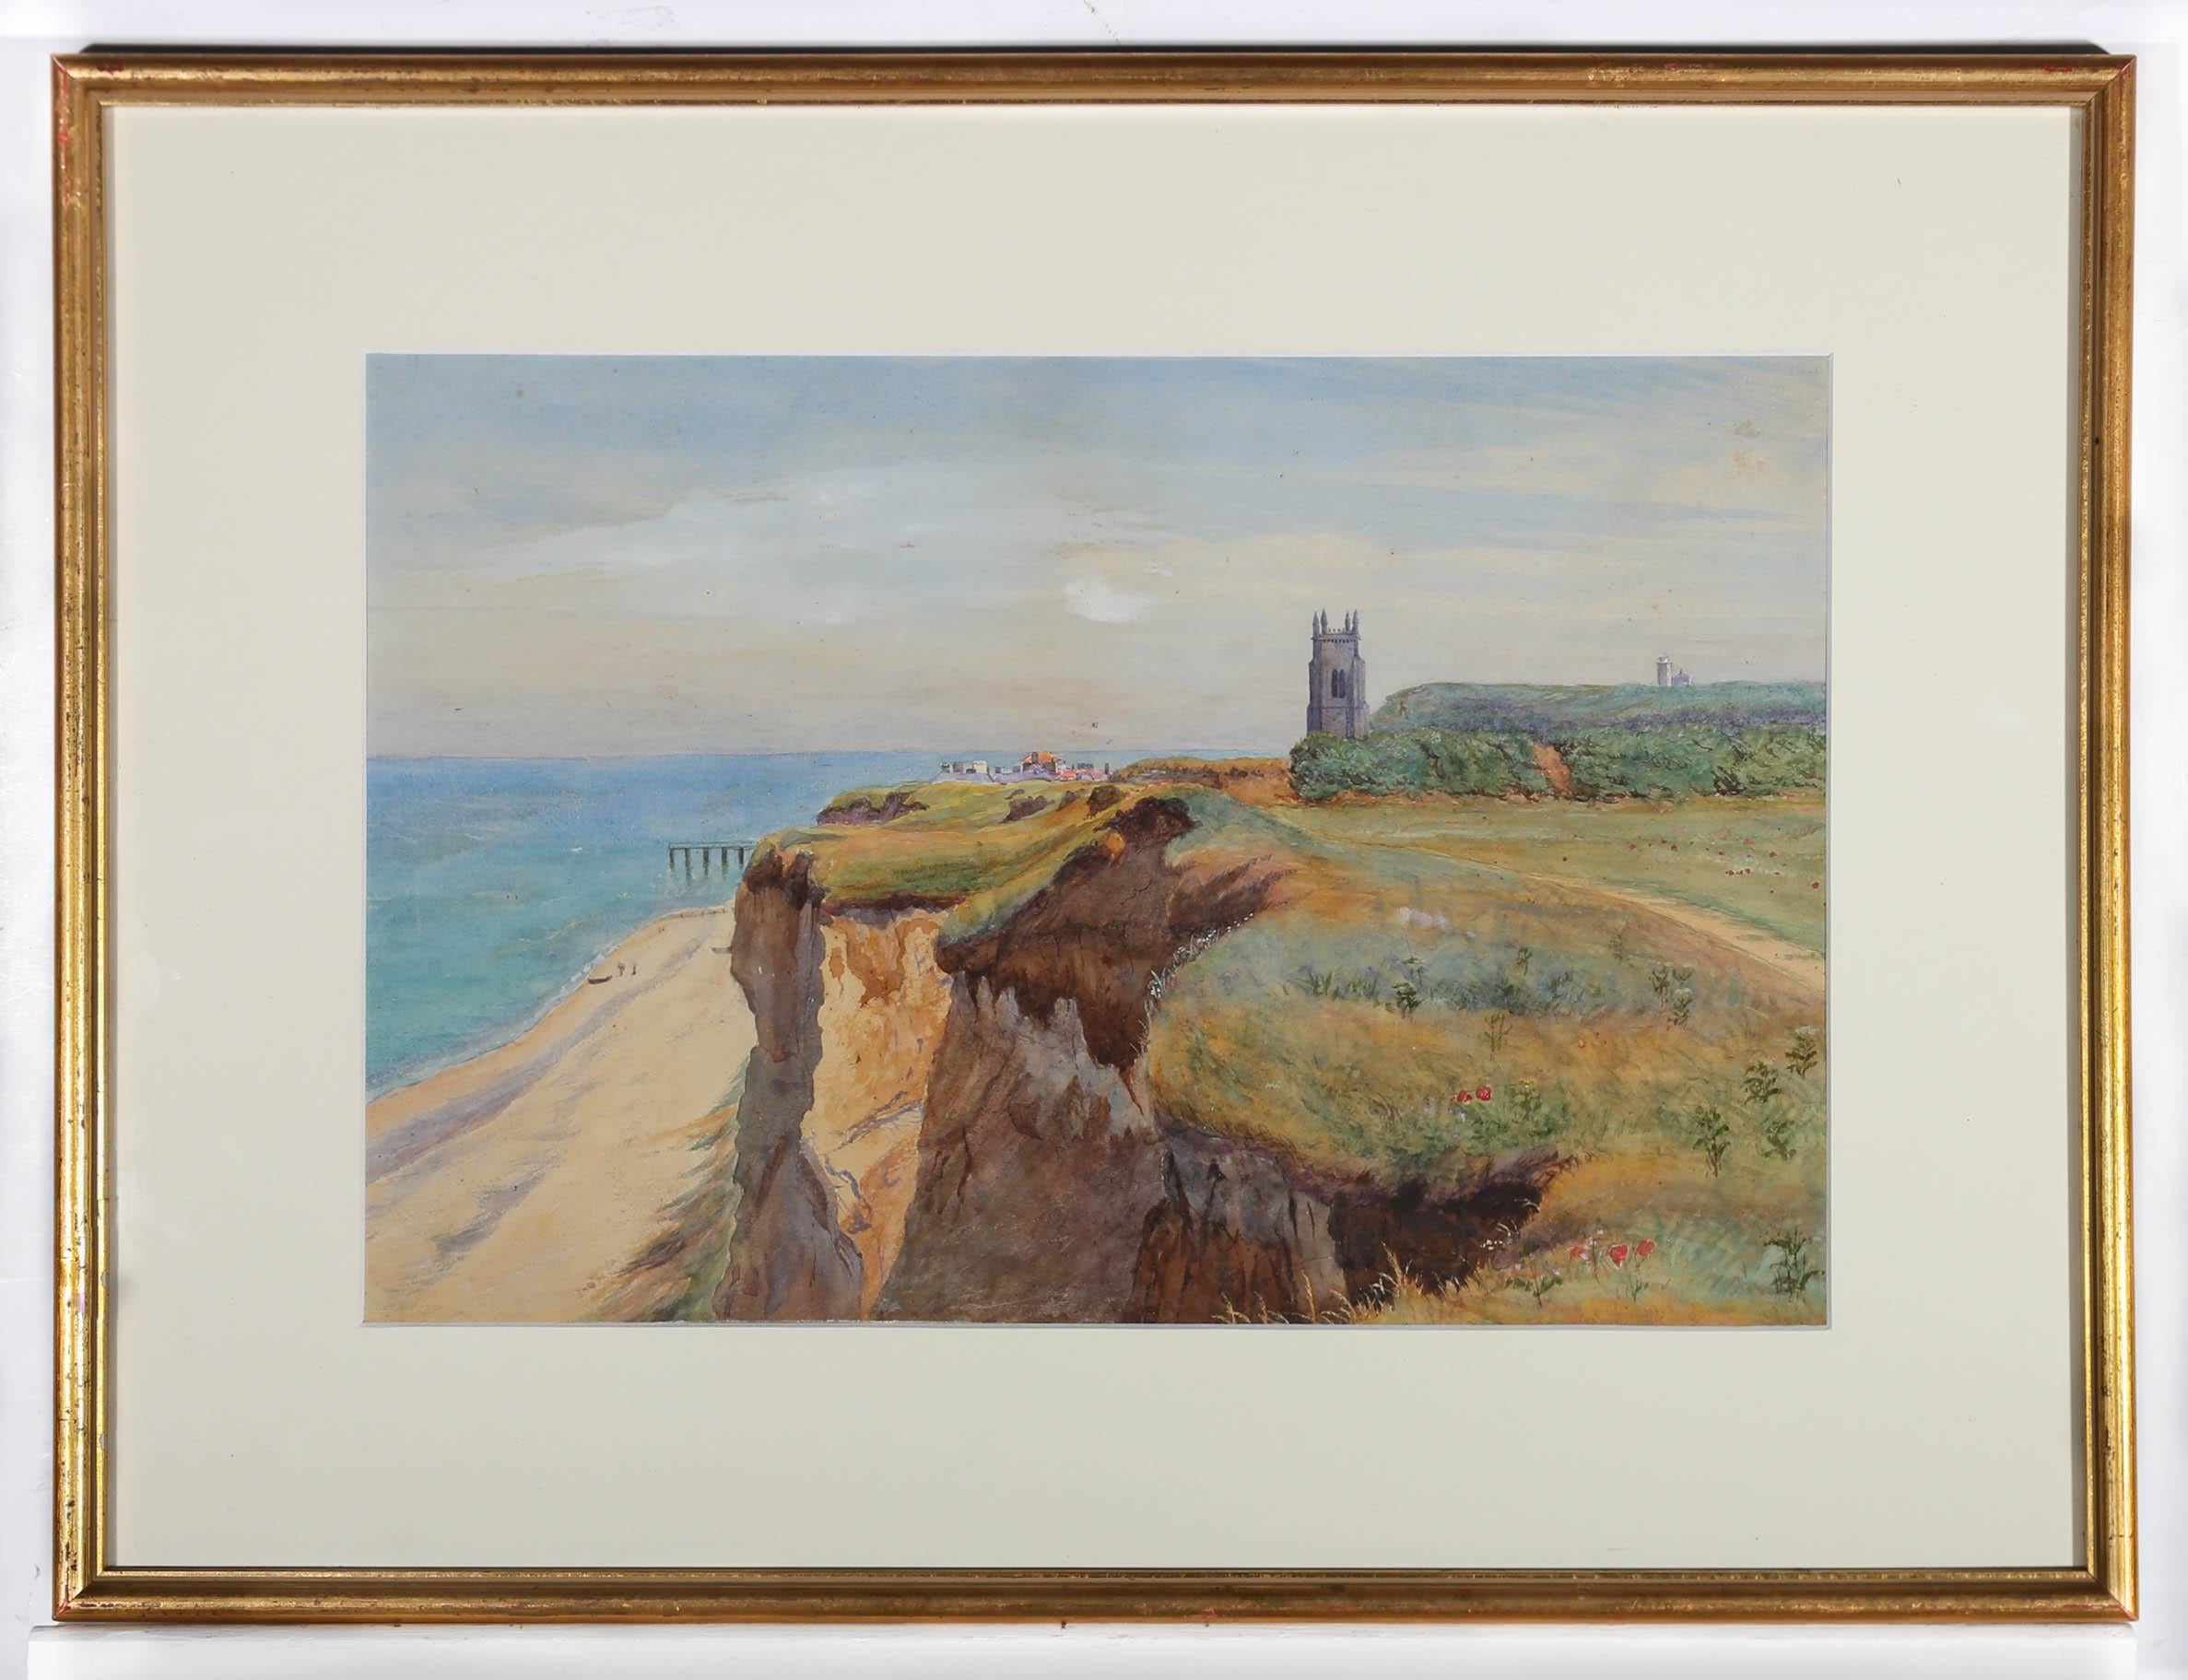 This delightful 19th century watercolour depicts a sweeping view along Norfolk's north coast, with the peeping town of Cromer and its towering parish church visible in the distance. The painting has been beautifully presented in a new card mount and